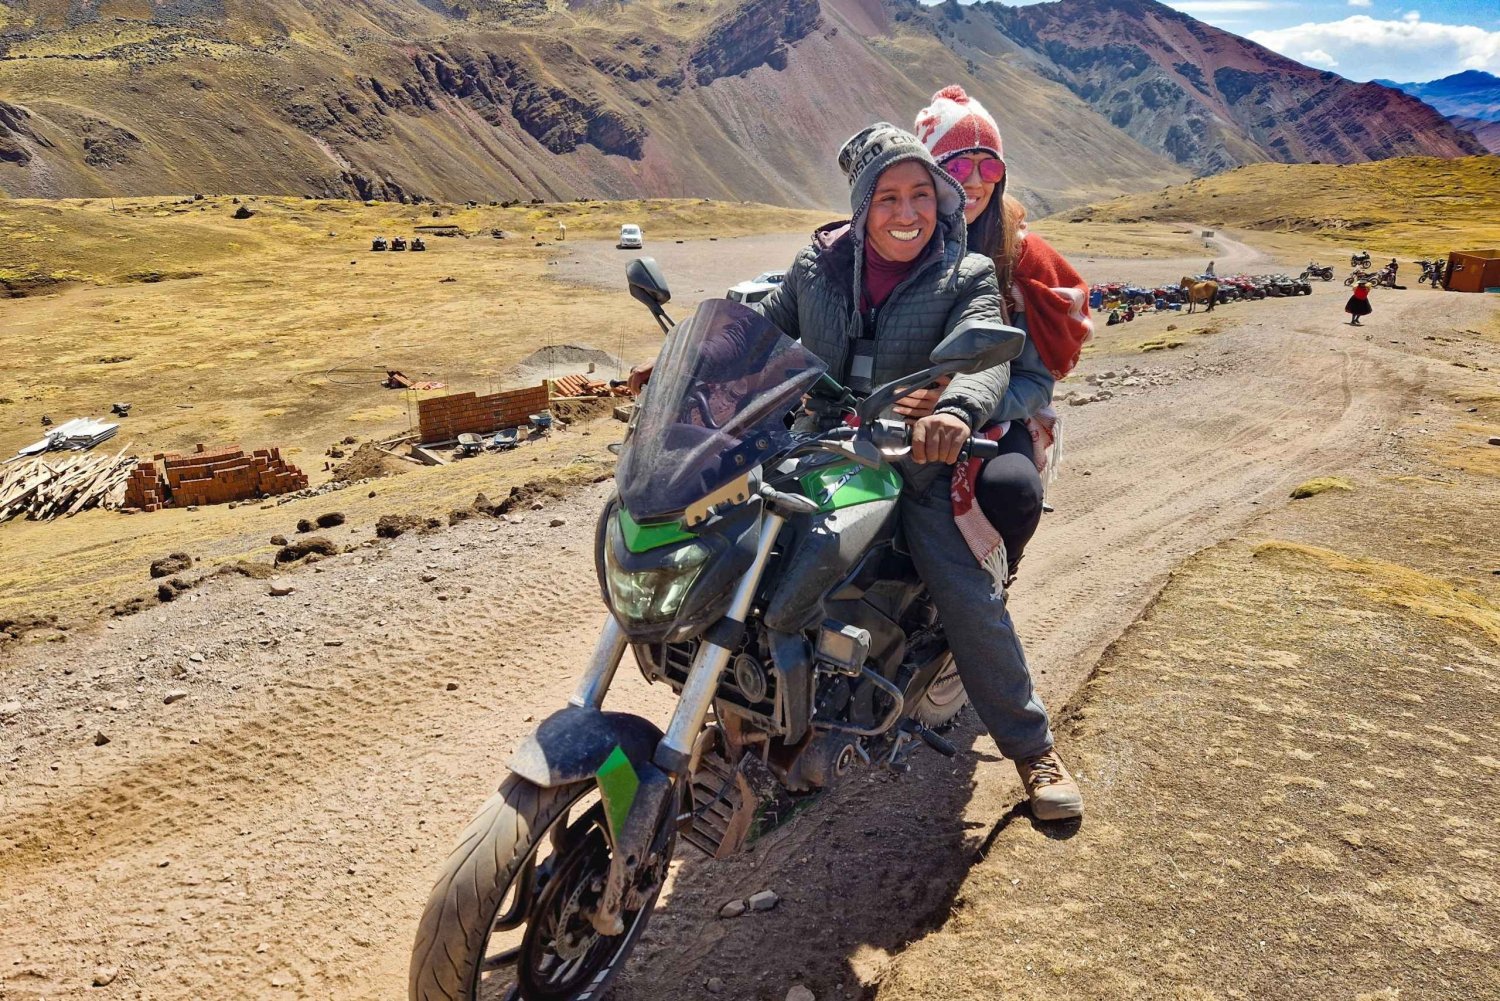 Rainbow Mountain, Skip the Hiking with Motorcycle Expedition